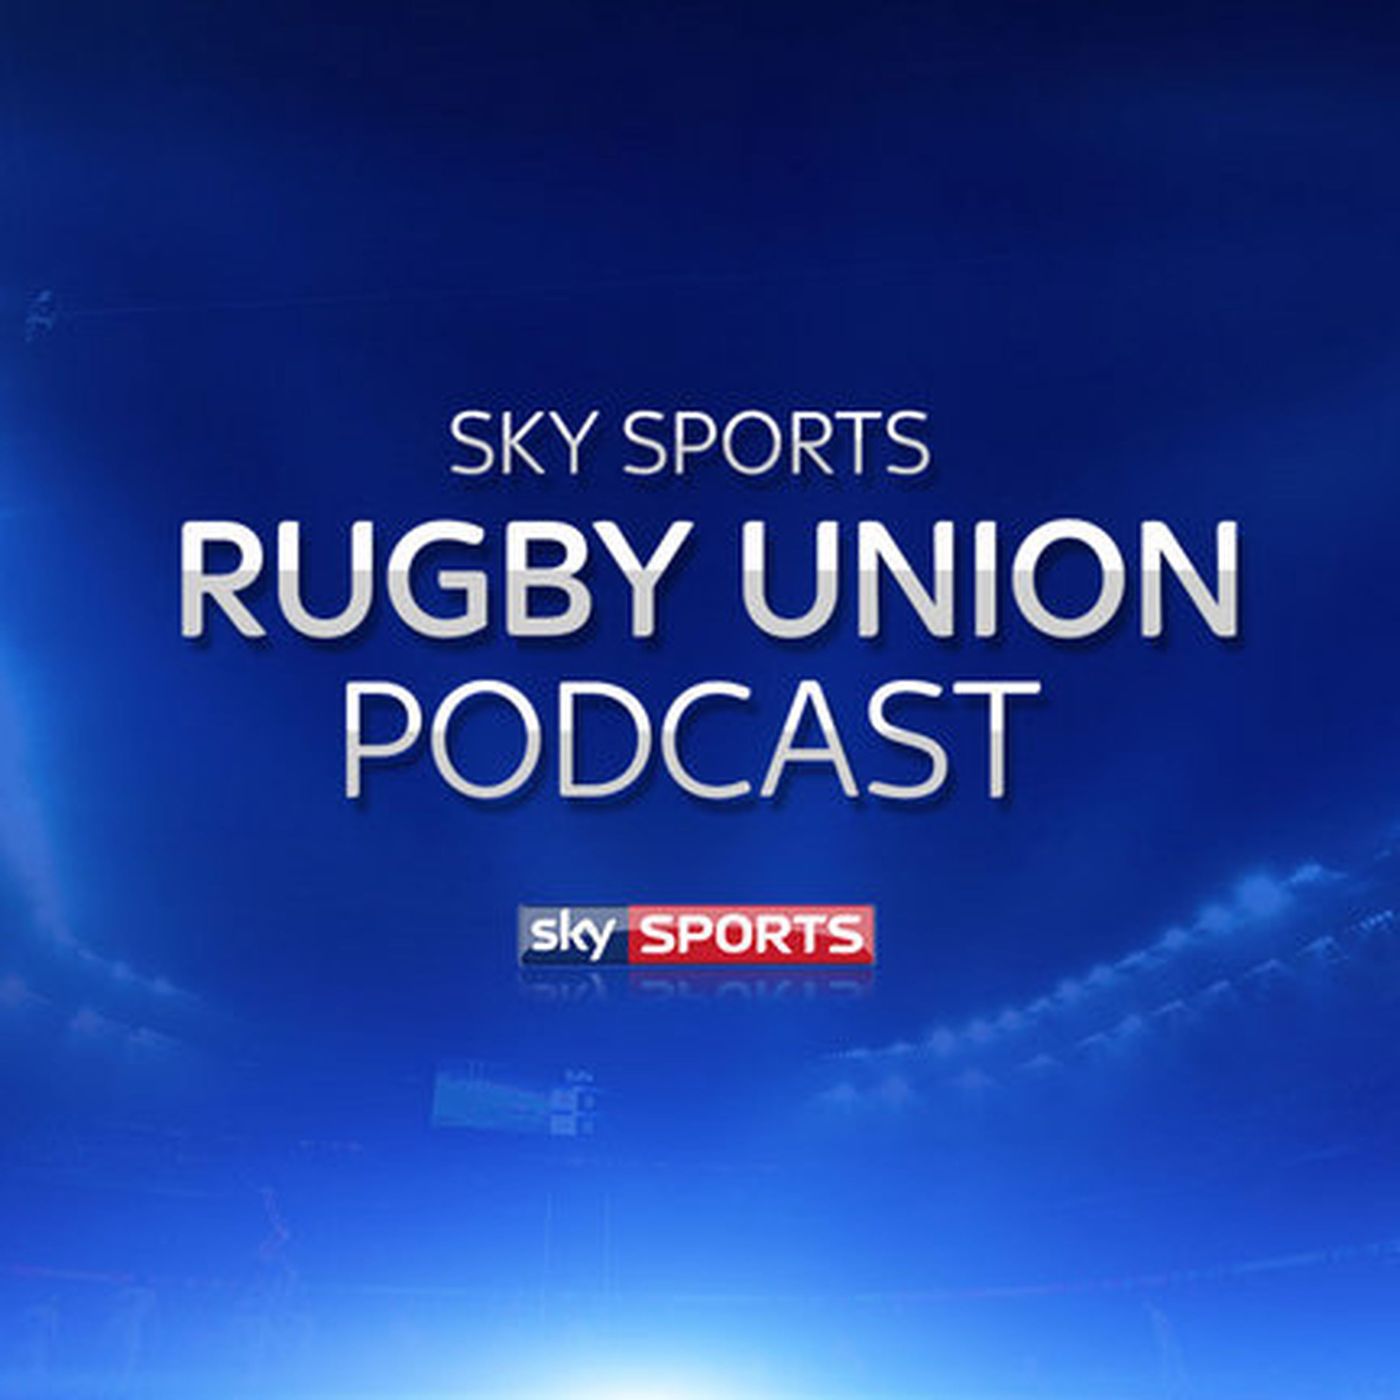 Sky Sports Rugby Union Podcast - 28th April